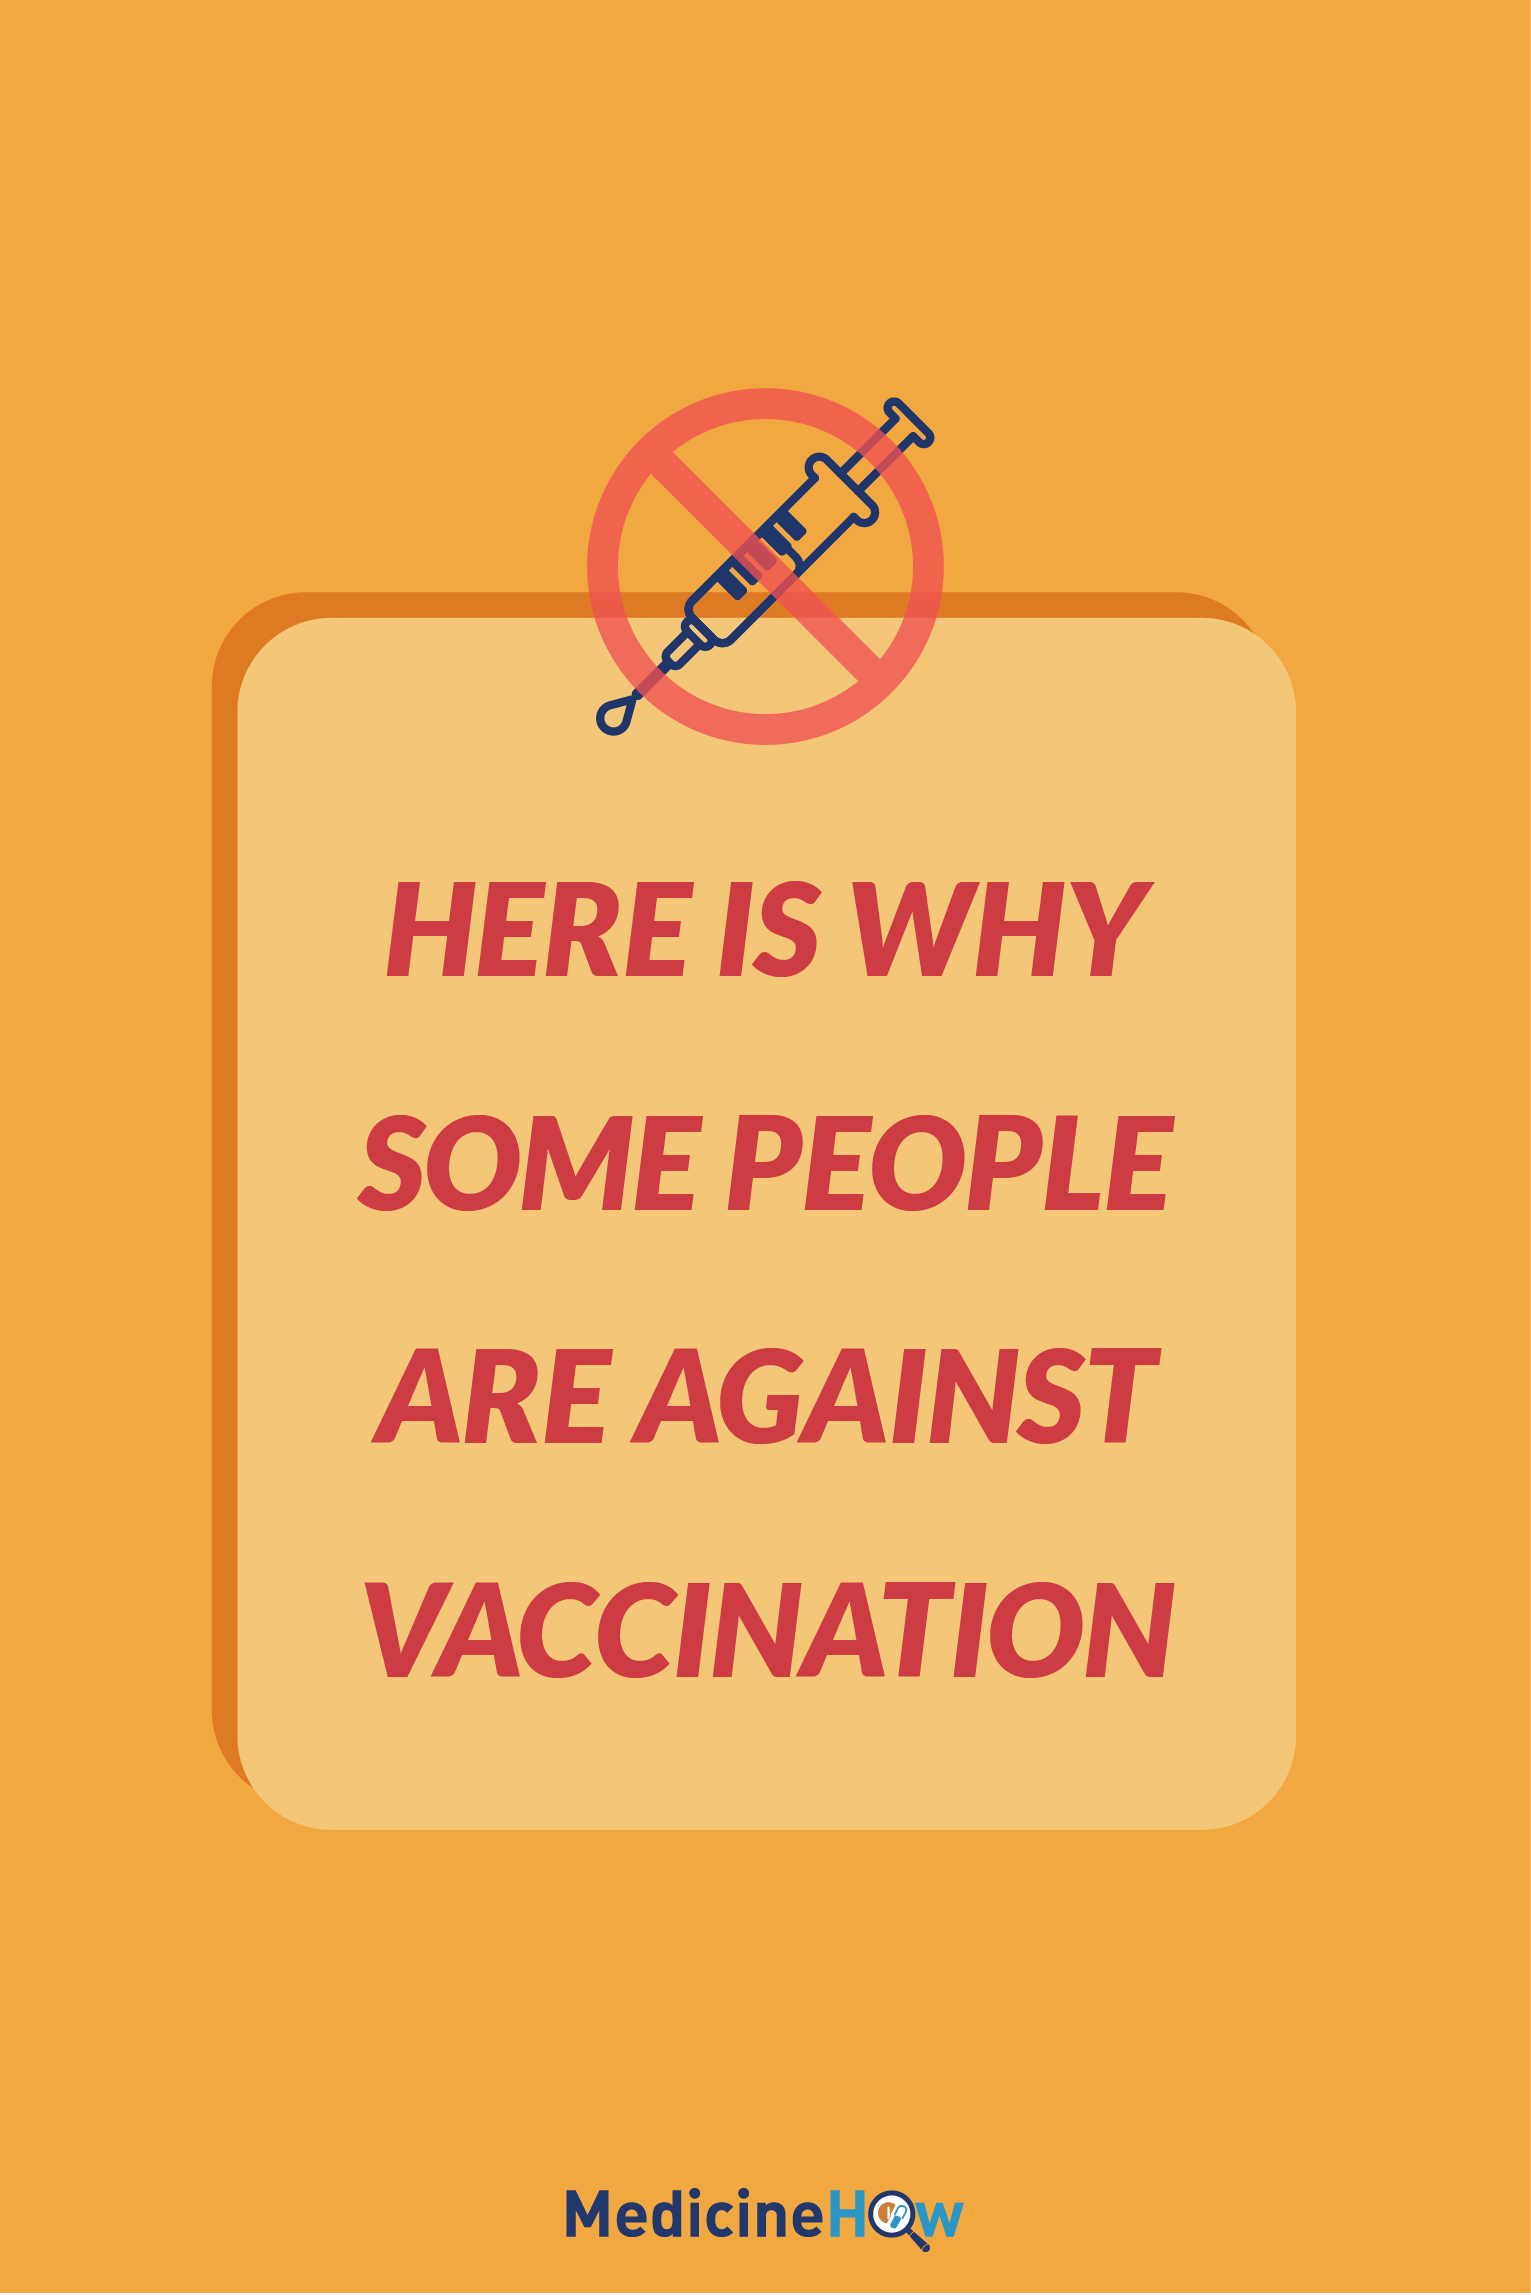 Here is why some people are against vaccination